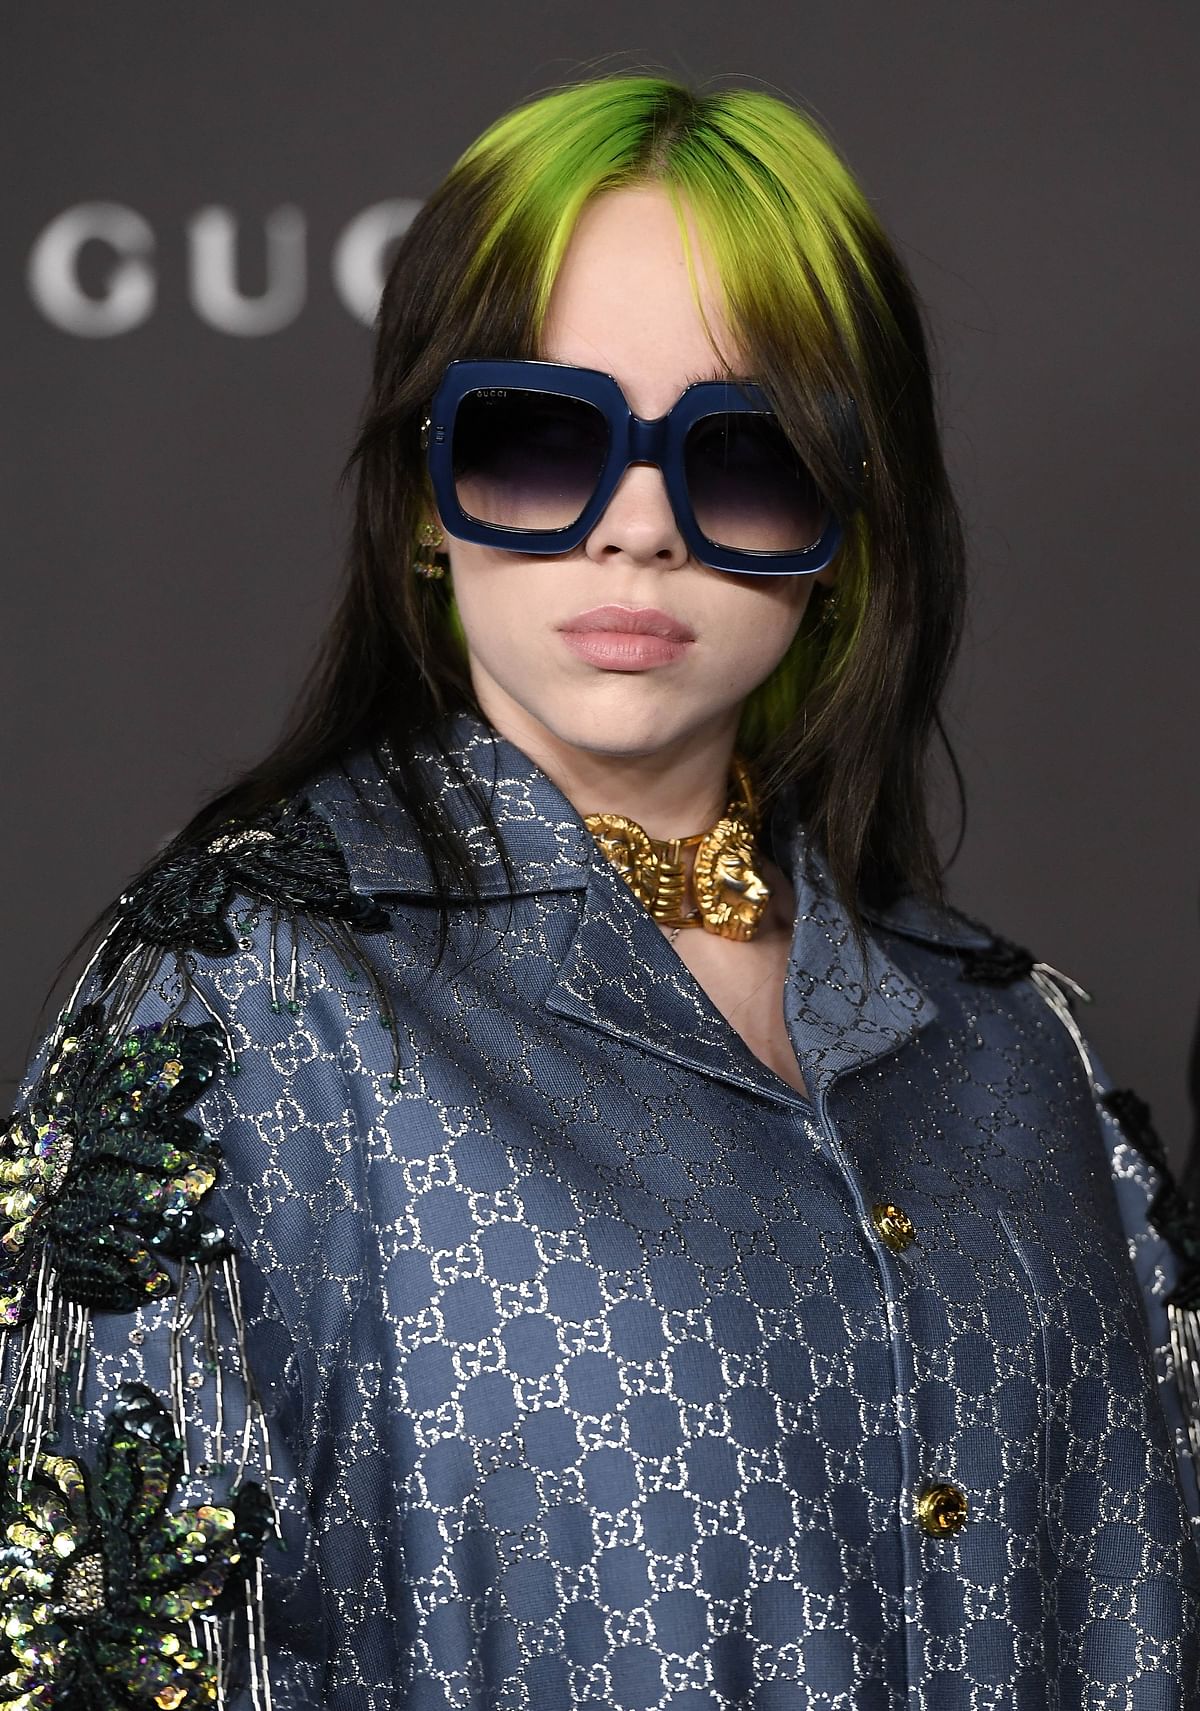 Billie Eilish attends the 2019 LACMA 2019 Art + Film Gala Presented by Gucci on 02 November, 2019 in Los Angeles, California. Photo: AFP